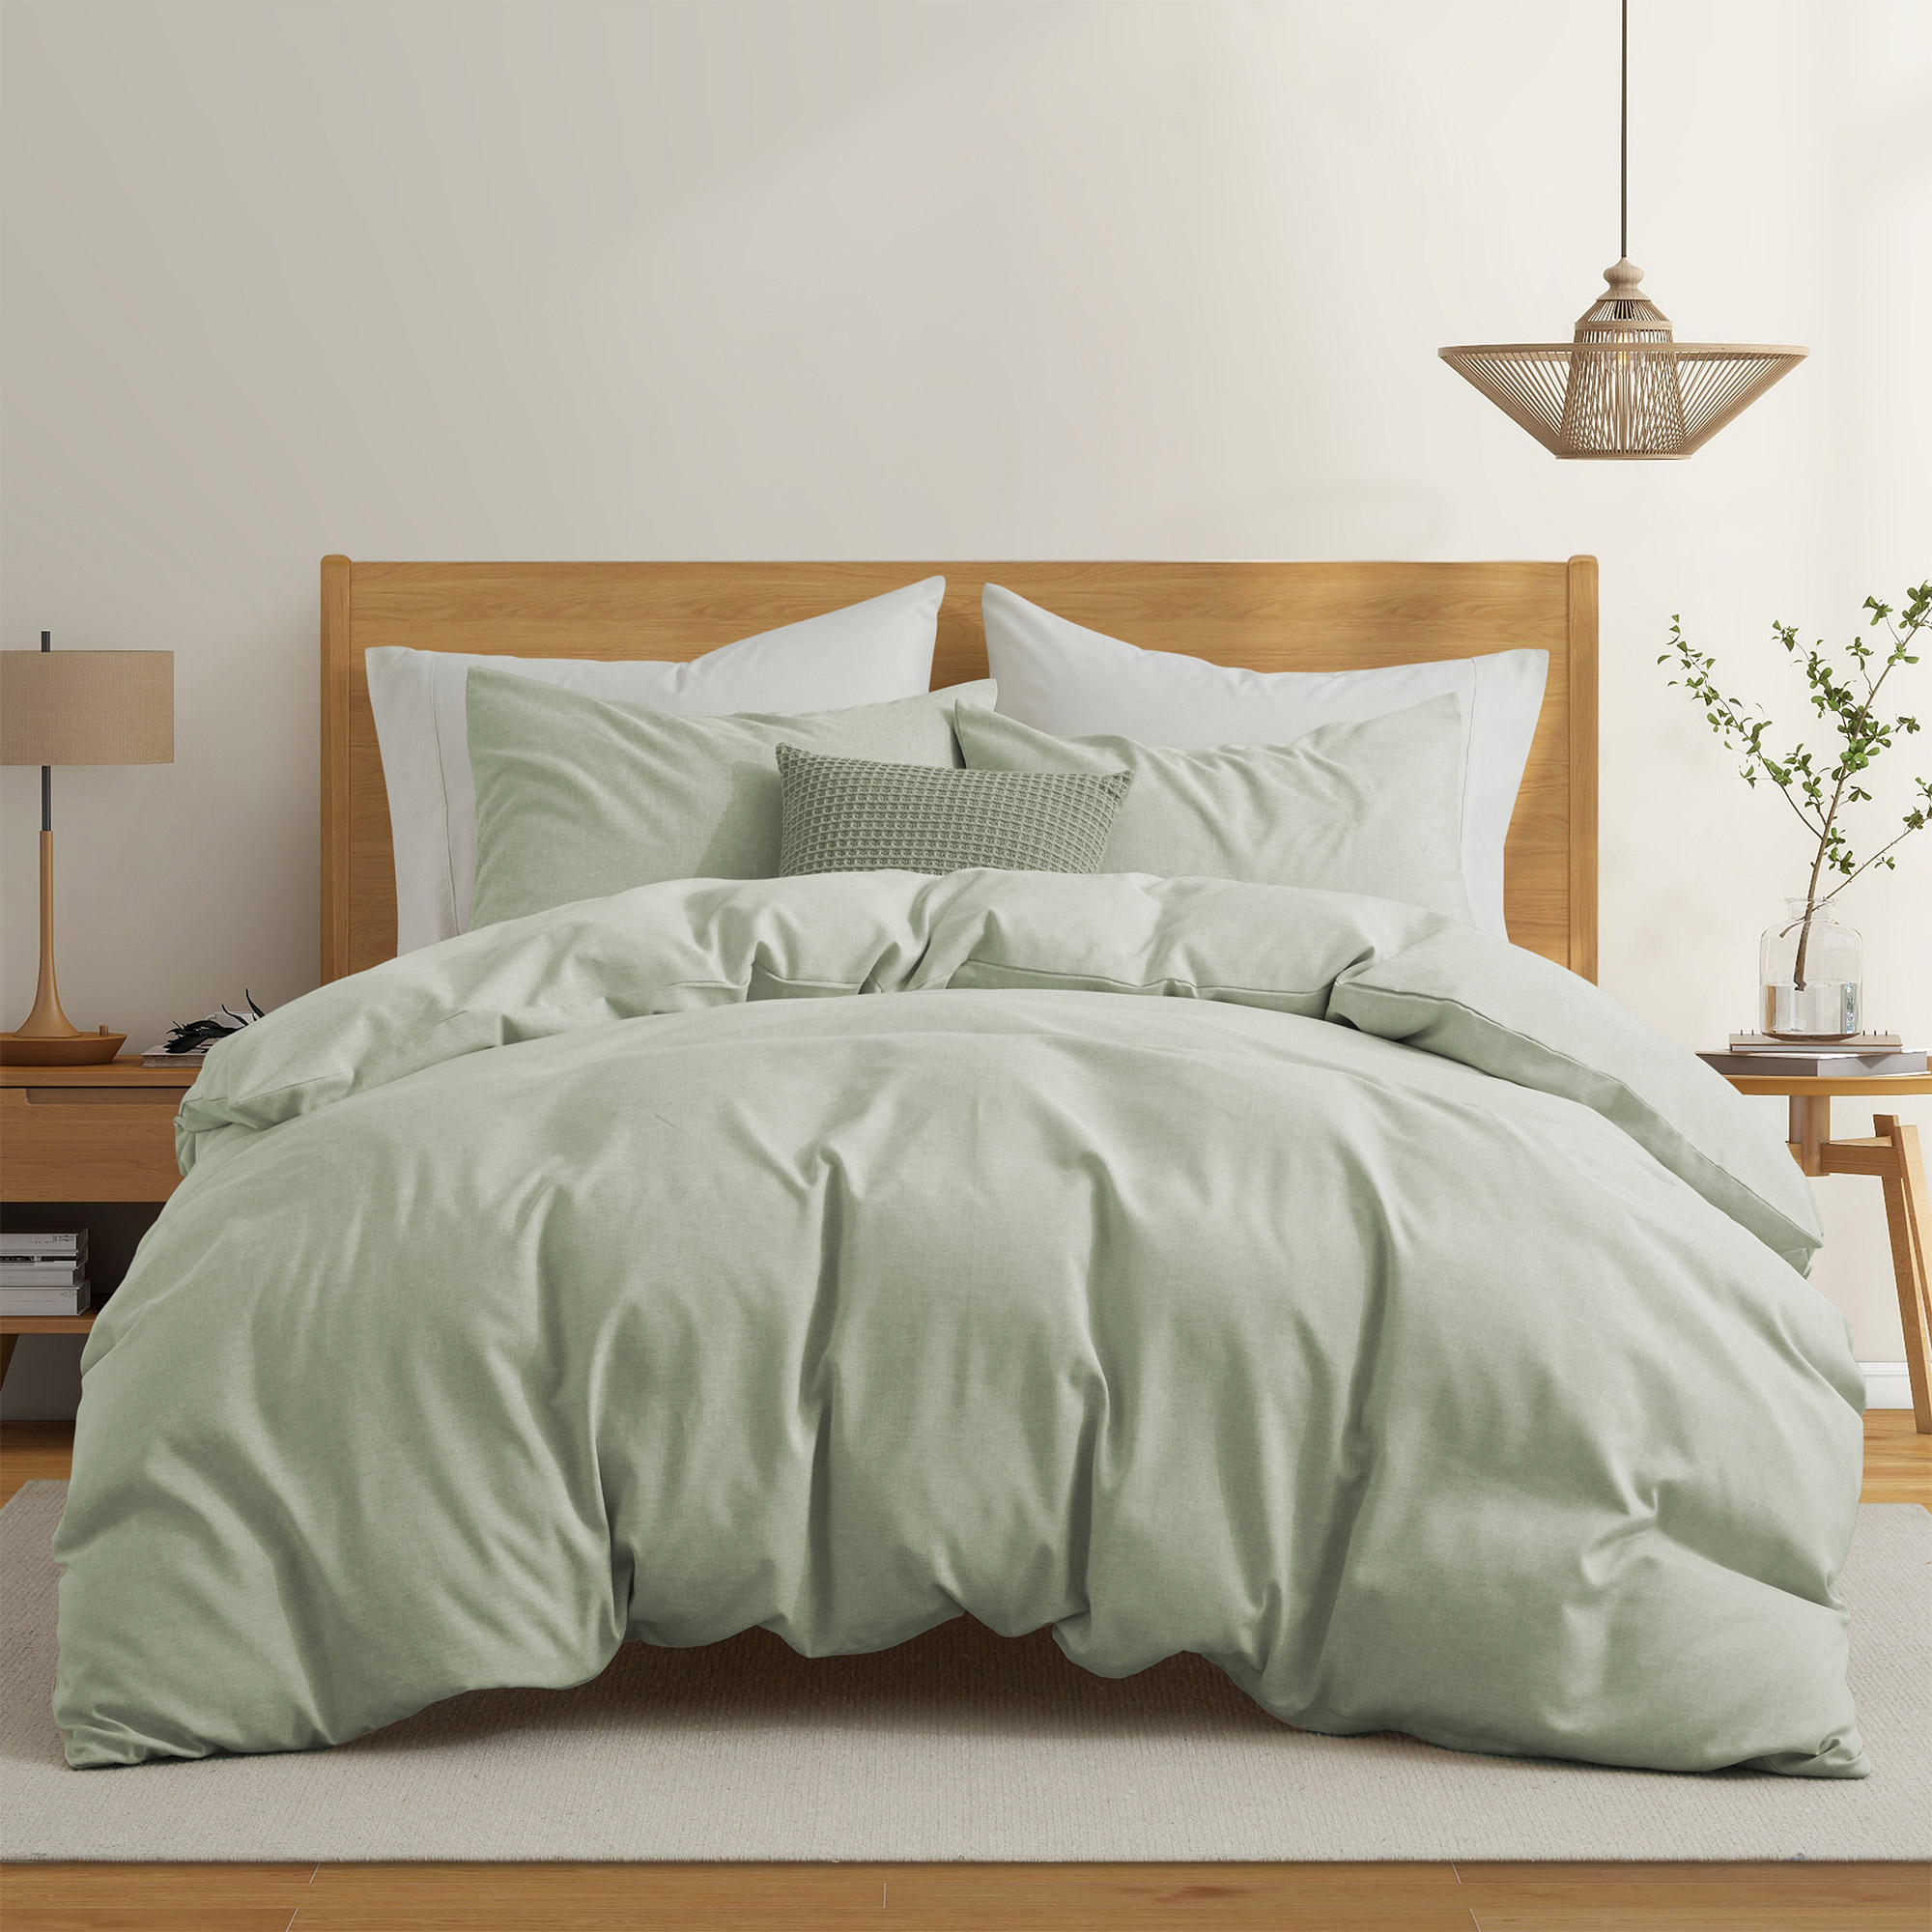 Solid Faux Linen Duvet Cover Set With Shams - Luxurious Comfort - Green, King-90x106